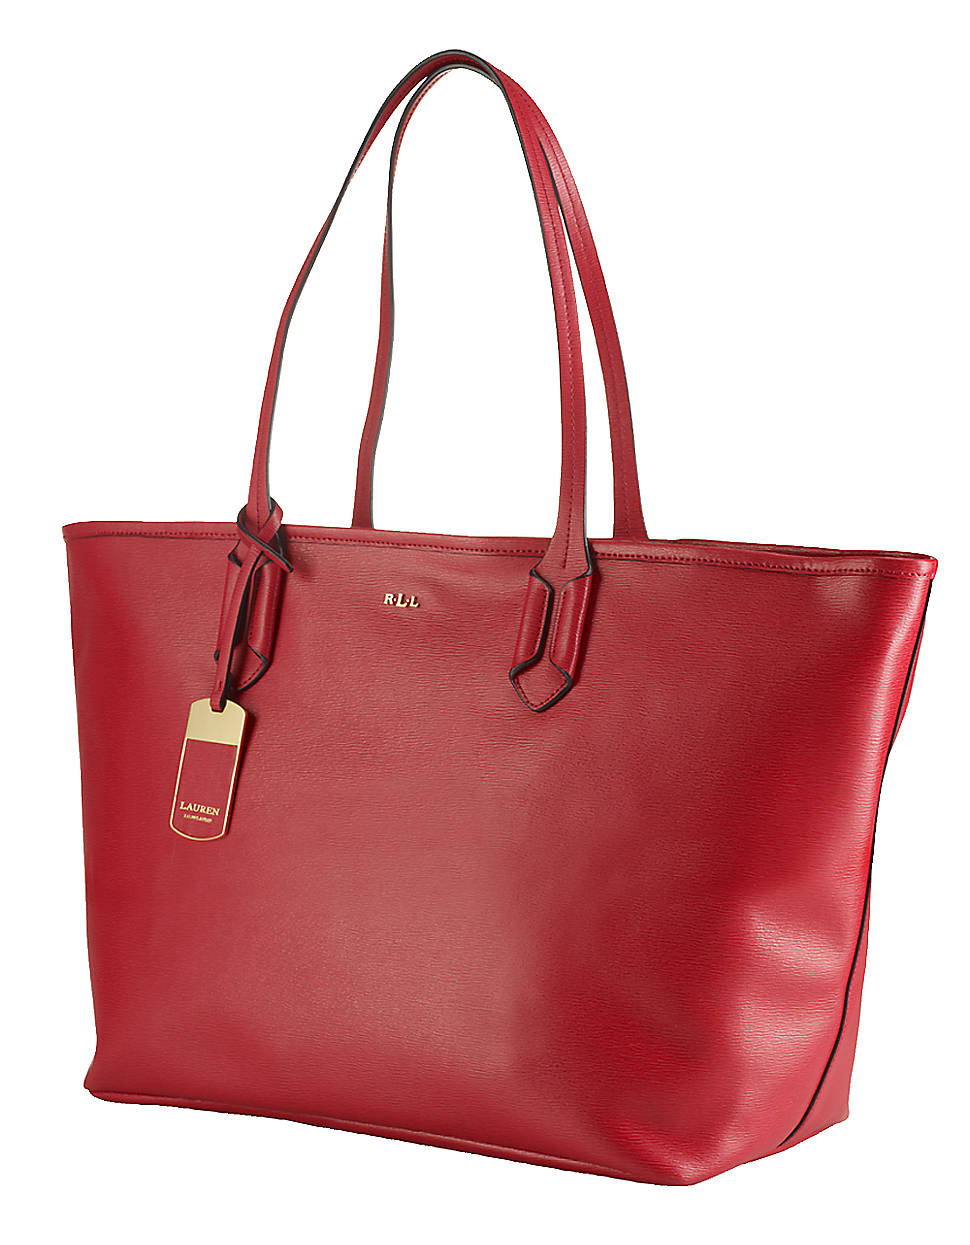 Lauren By Ralph Lauren Tate Classic Leather Tote Bag in Red | Lyst